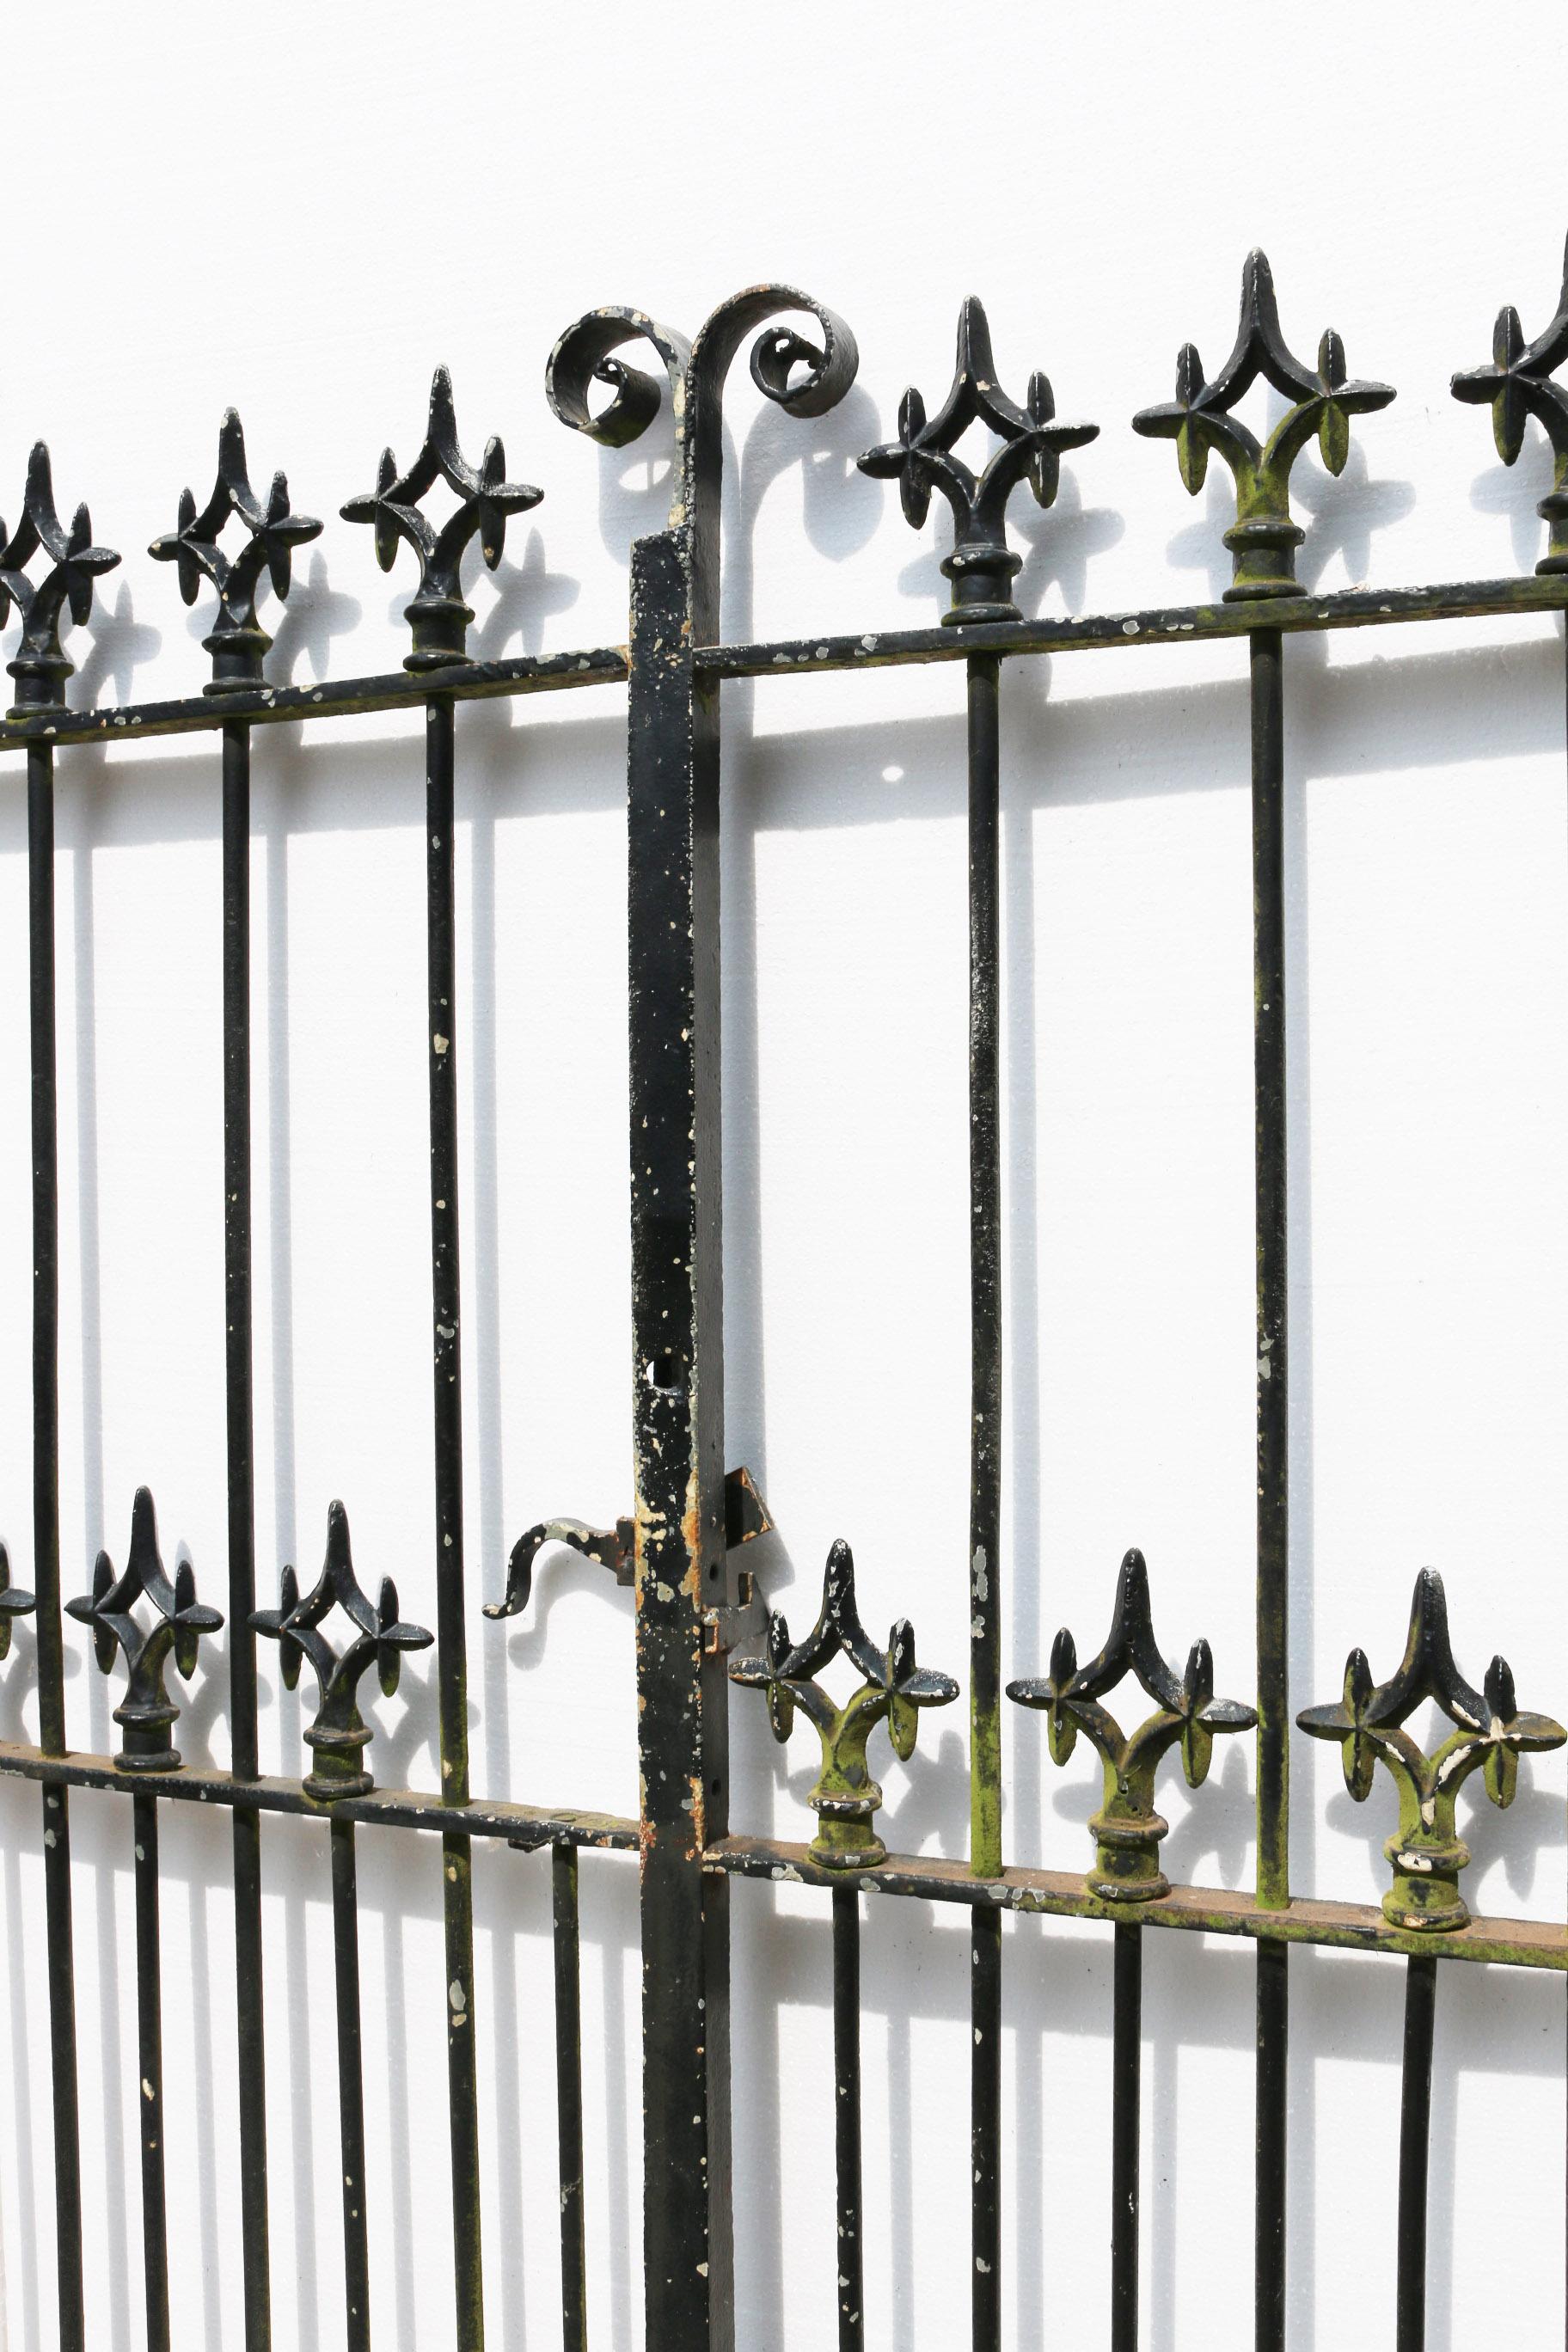 These gates would require a top coat to finish them and they have both a working latch and gate stay.
The width listed excludes the hinges.
Weight 1-23 kg 2-25 kg.